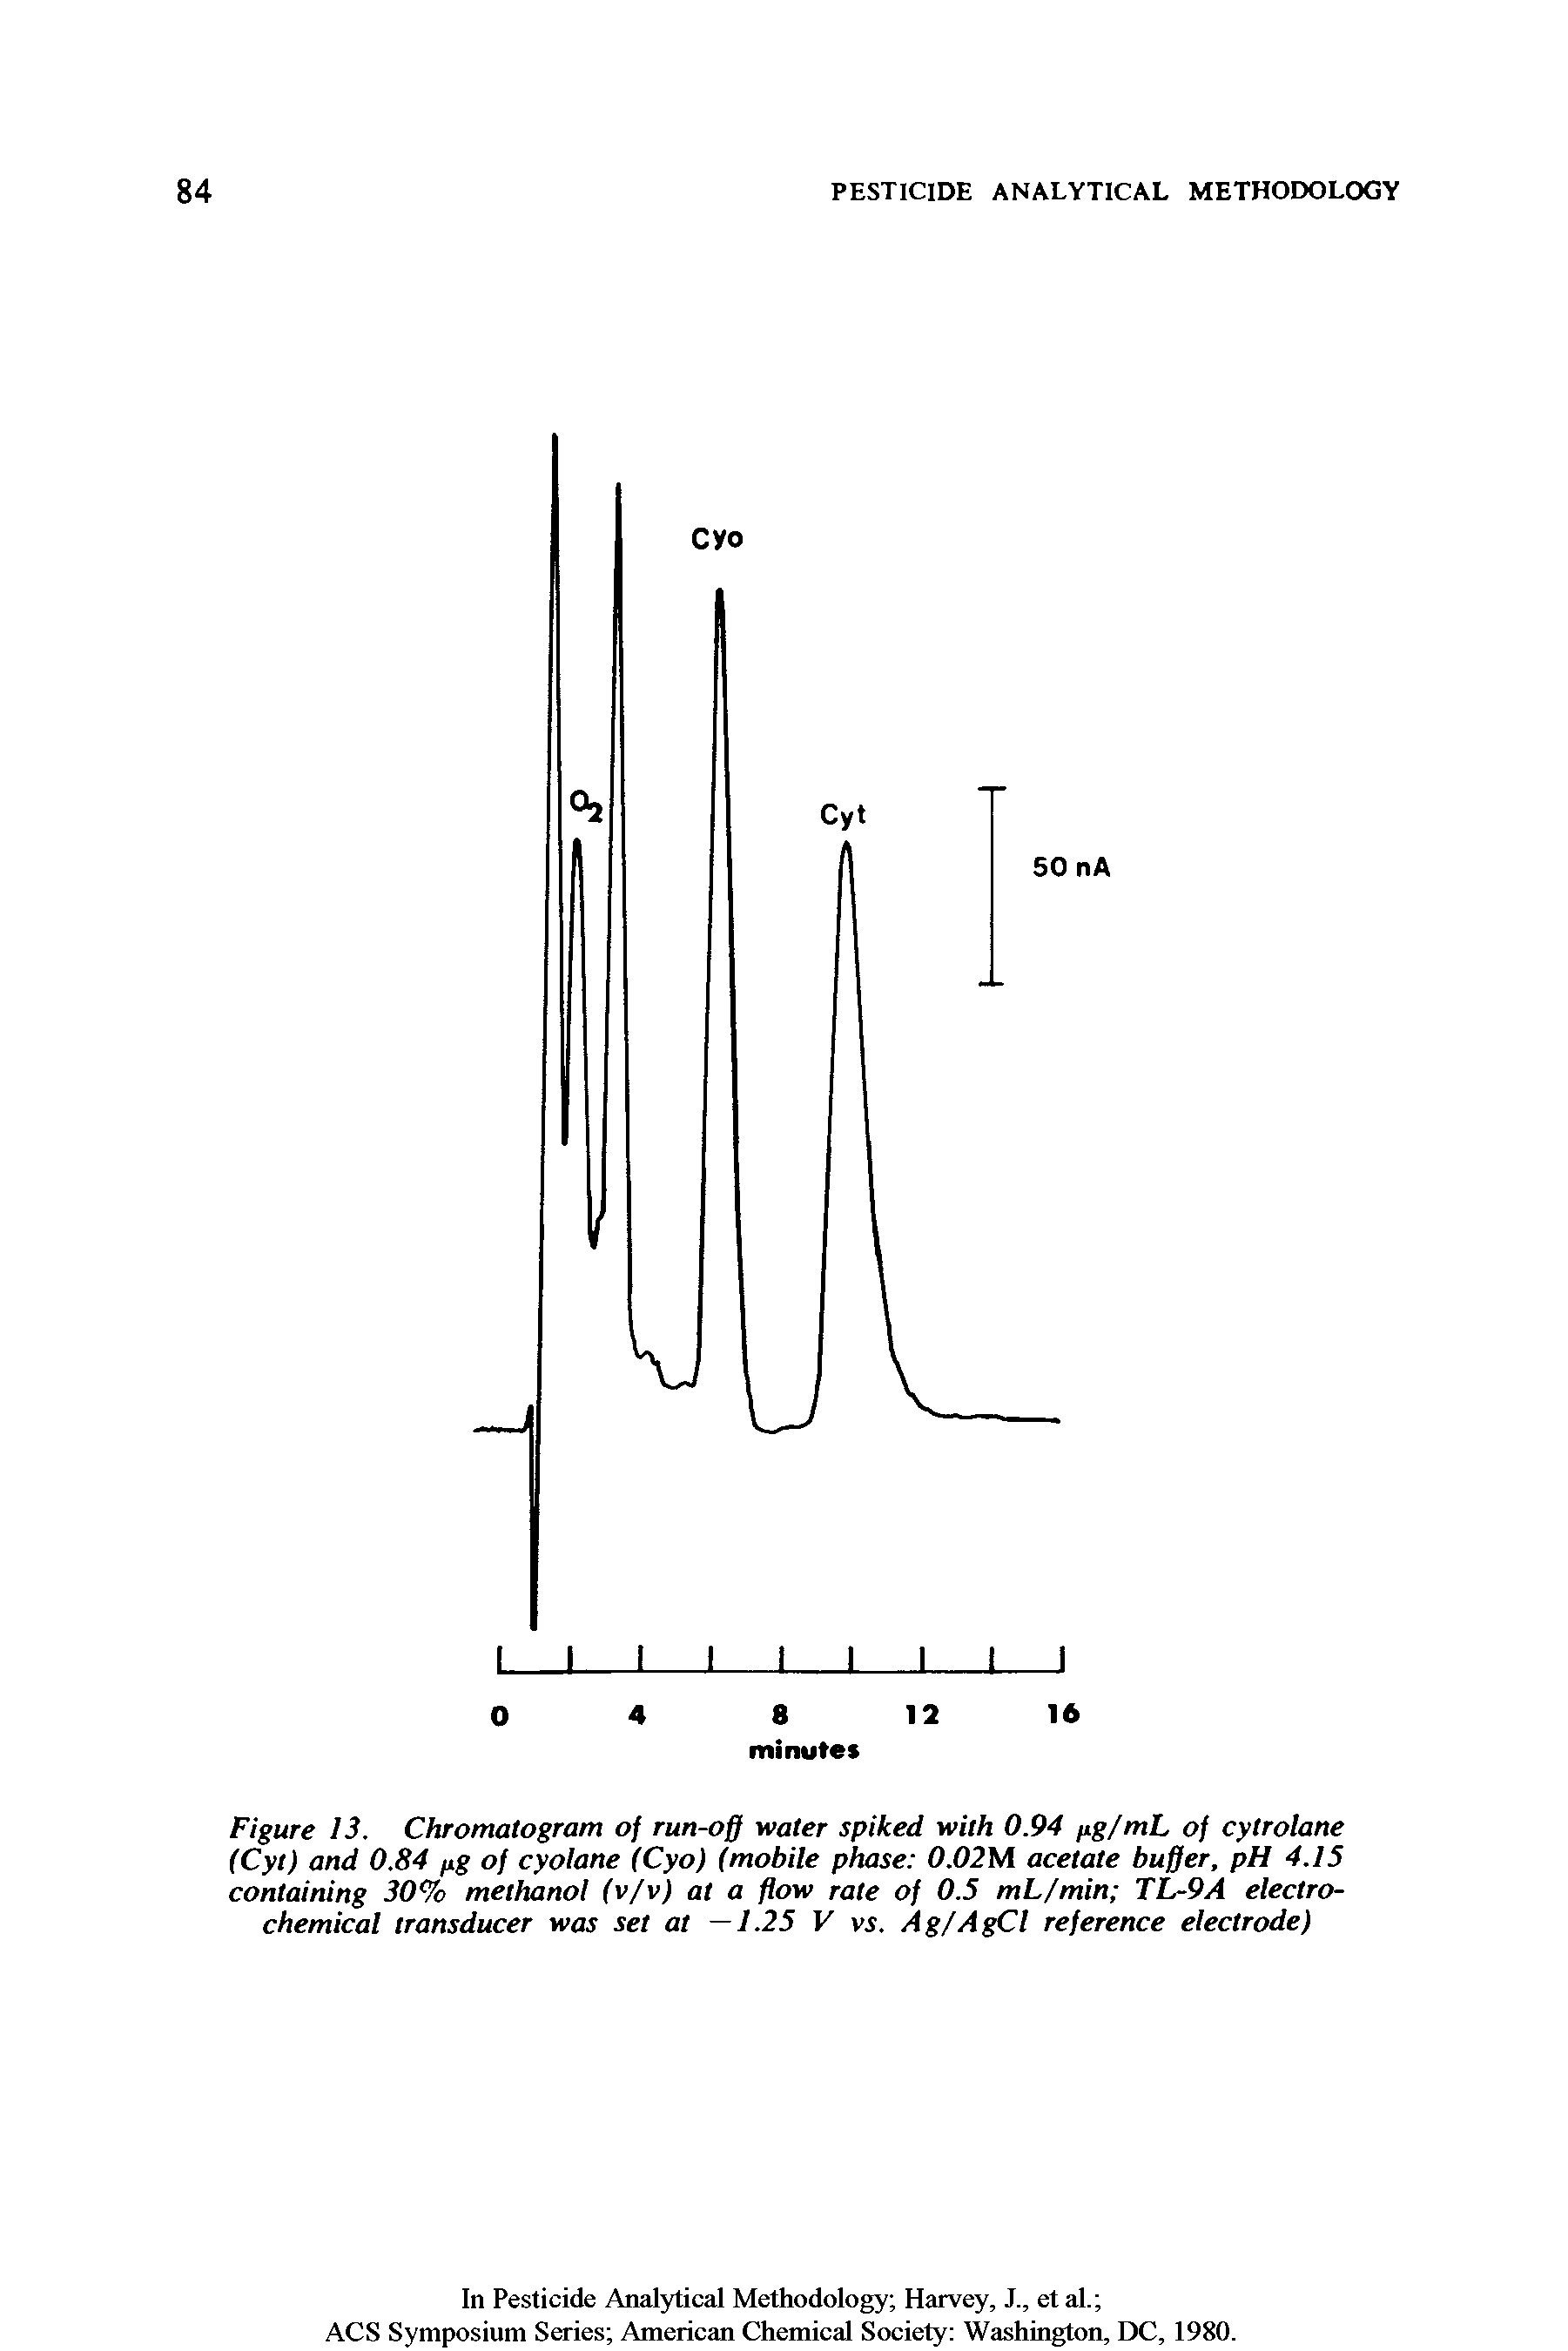 Figure 13. Chromatogram of run-off water spiked with 0.94 pg/mL of cytrolane (Cyt) and 0.84 fig of cyolane (Cyo) (mobile phase 0.02M acetate buffer, pH 4.15 containing 30% methanol (v/v) at a flow rate of 0.5 mL/min TL-9A electrochemical transducer was set at —1.25 V vs. Ag/AgCl reference electrode)...